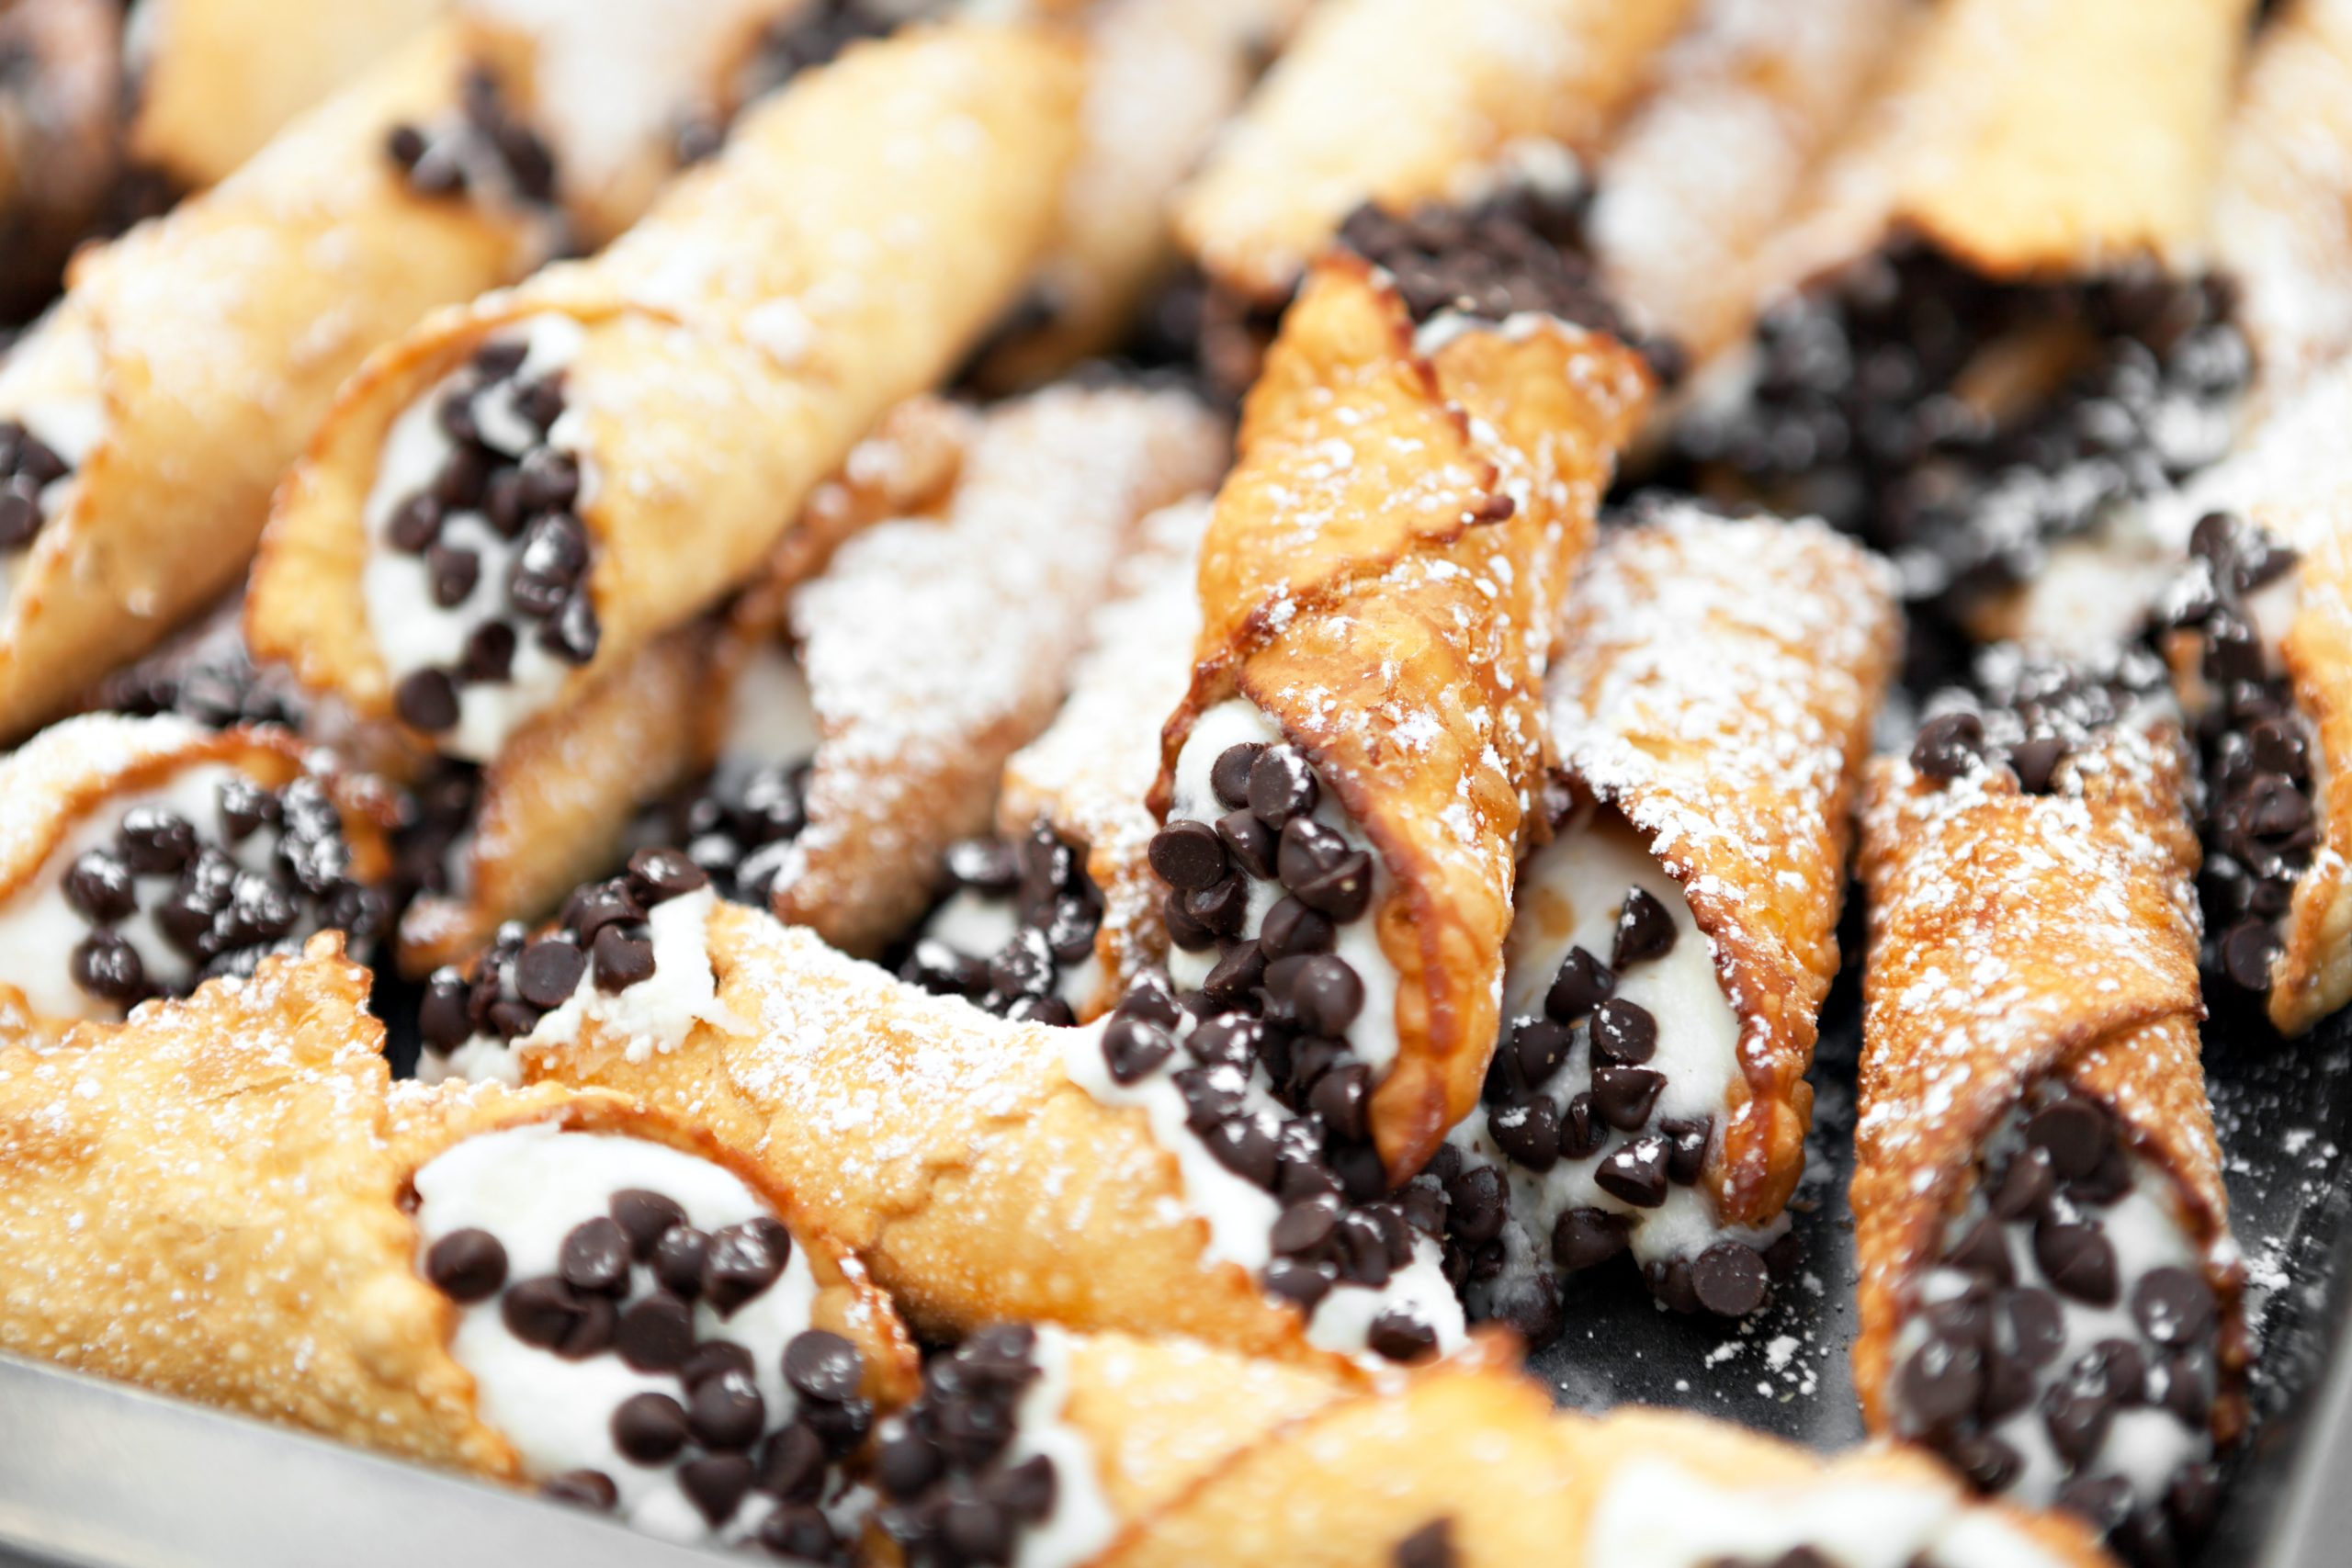 Pile of cannoli with chocolate chips on the end, one of the most popular street foods in Sicily Italy